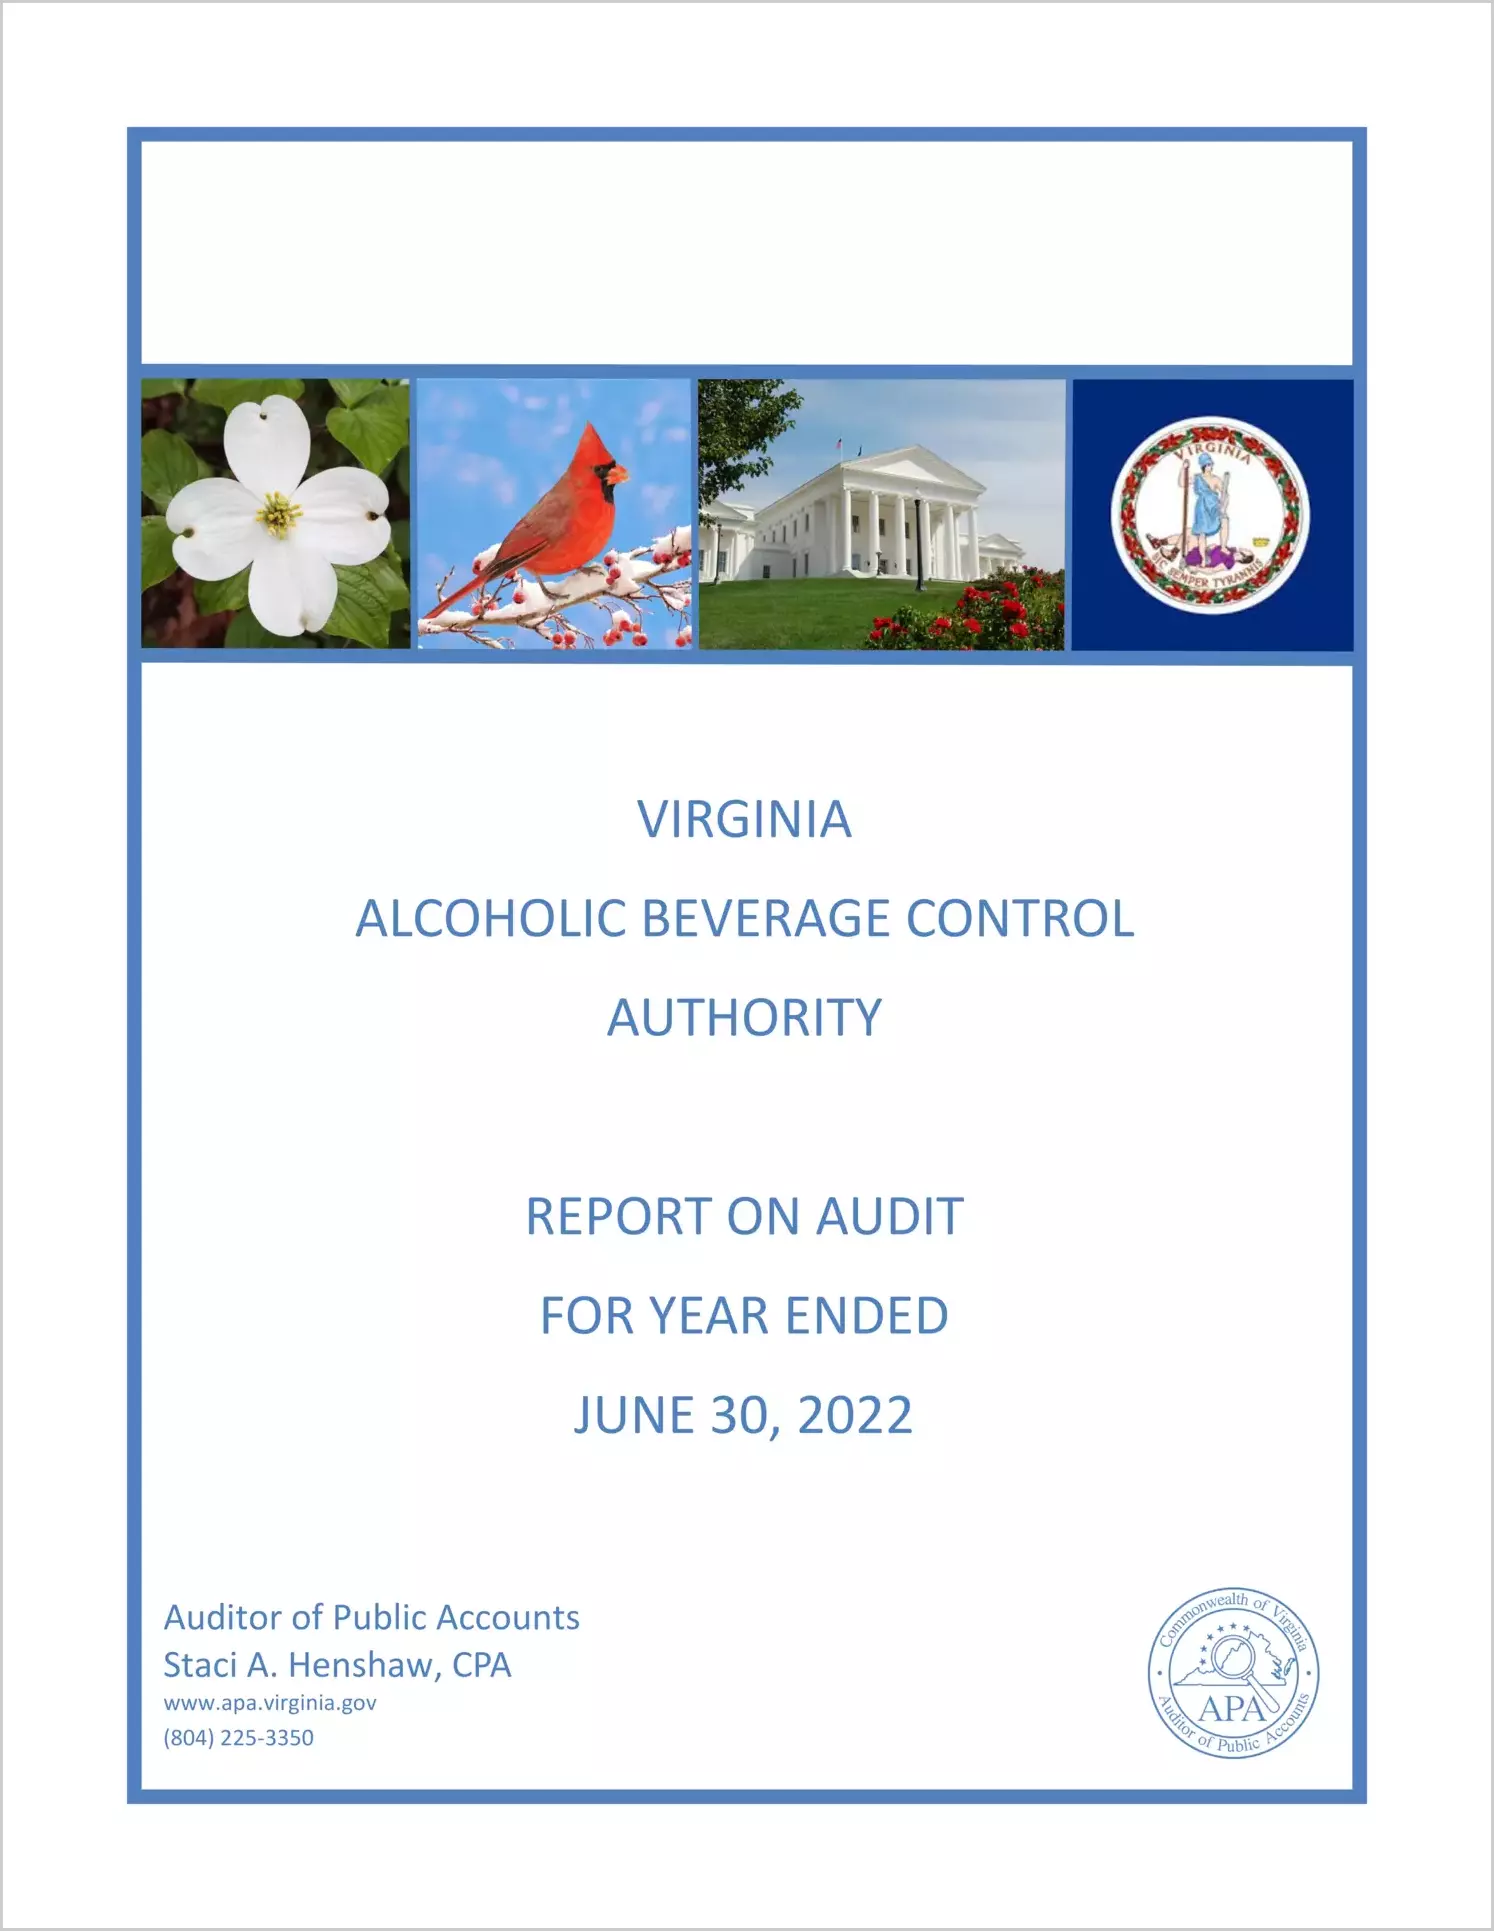 Virginia Alcoholic Beverage Control Authority for the year ended June 30, 2022